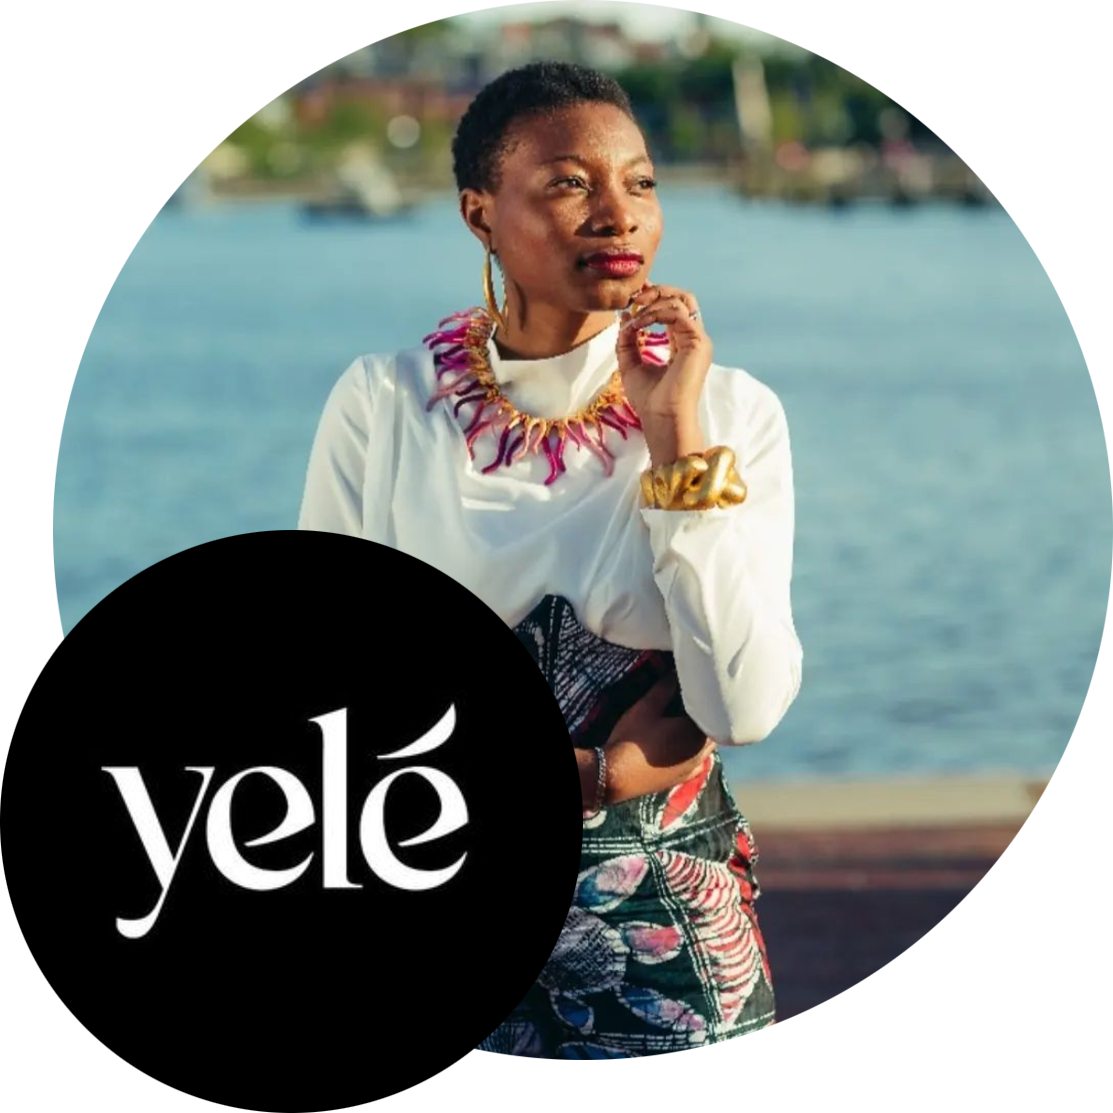 Yele Stitches Logo & promotional images featuring founder, Yele Oladeinde. Yele is posing against a fence by a waterfront, looking off to the right, her fingers gently placed against her chin. She's wearing a bright & colorful statement necklace over a white blouse, and a colorful printed skirt. 